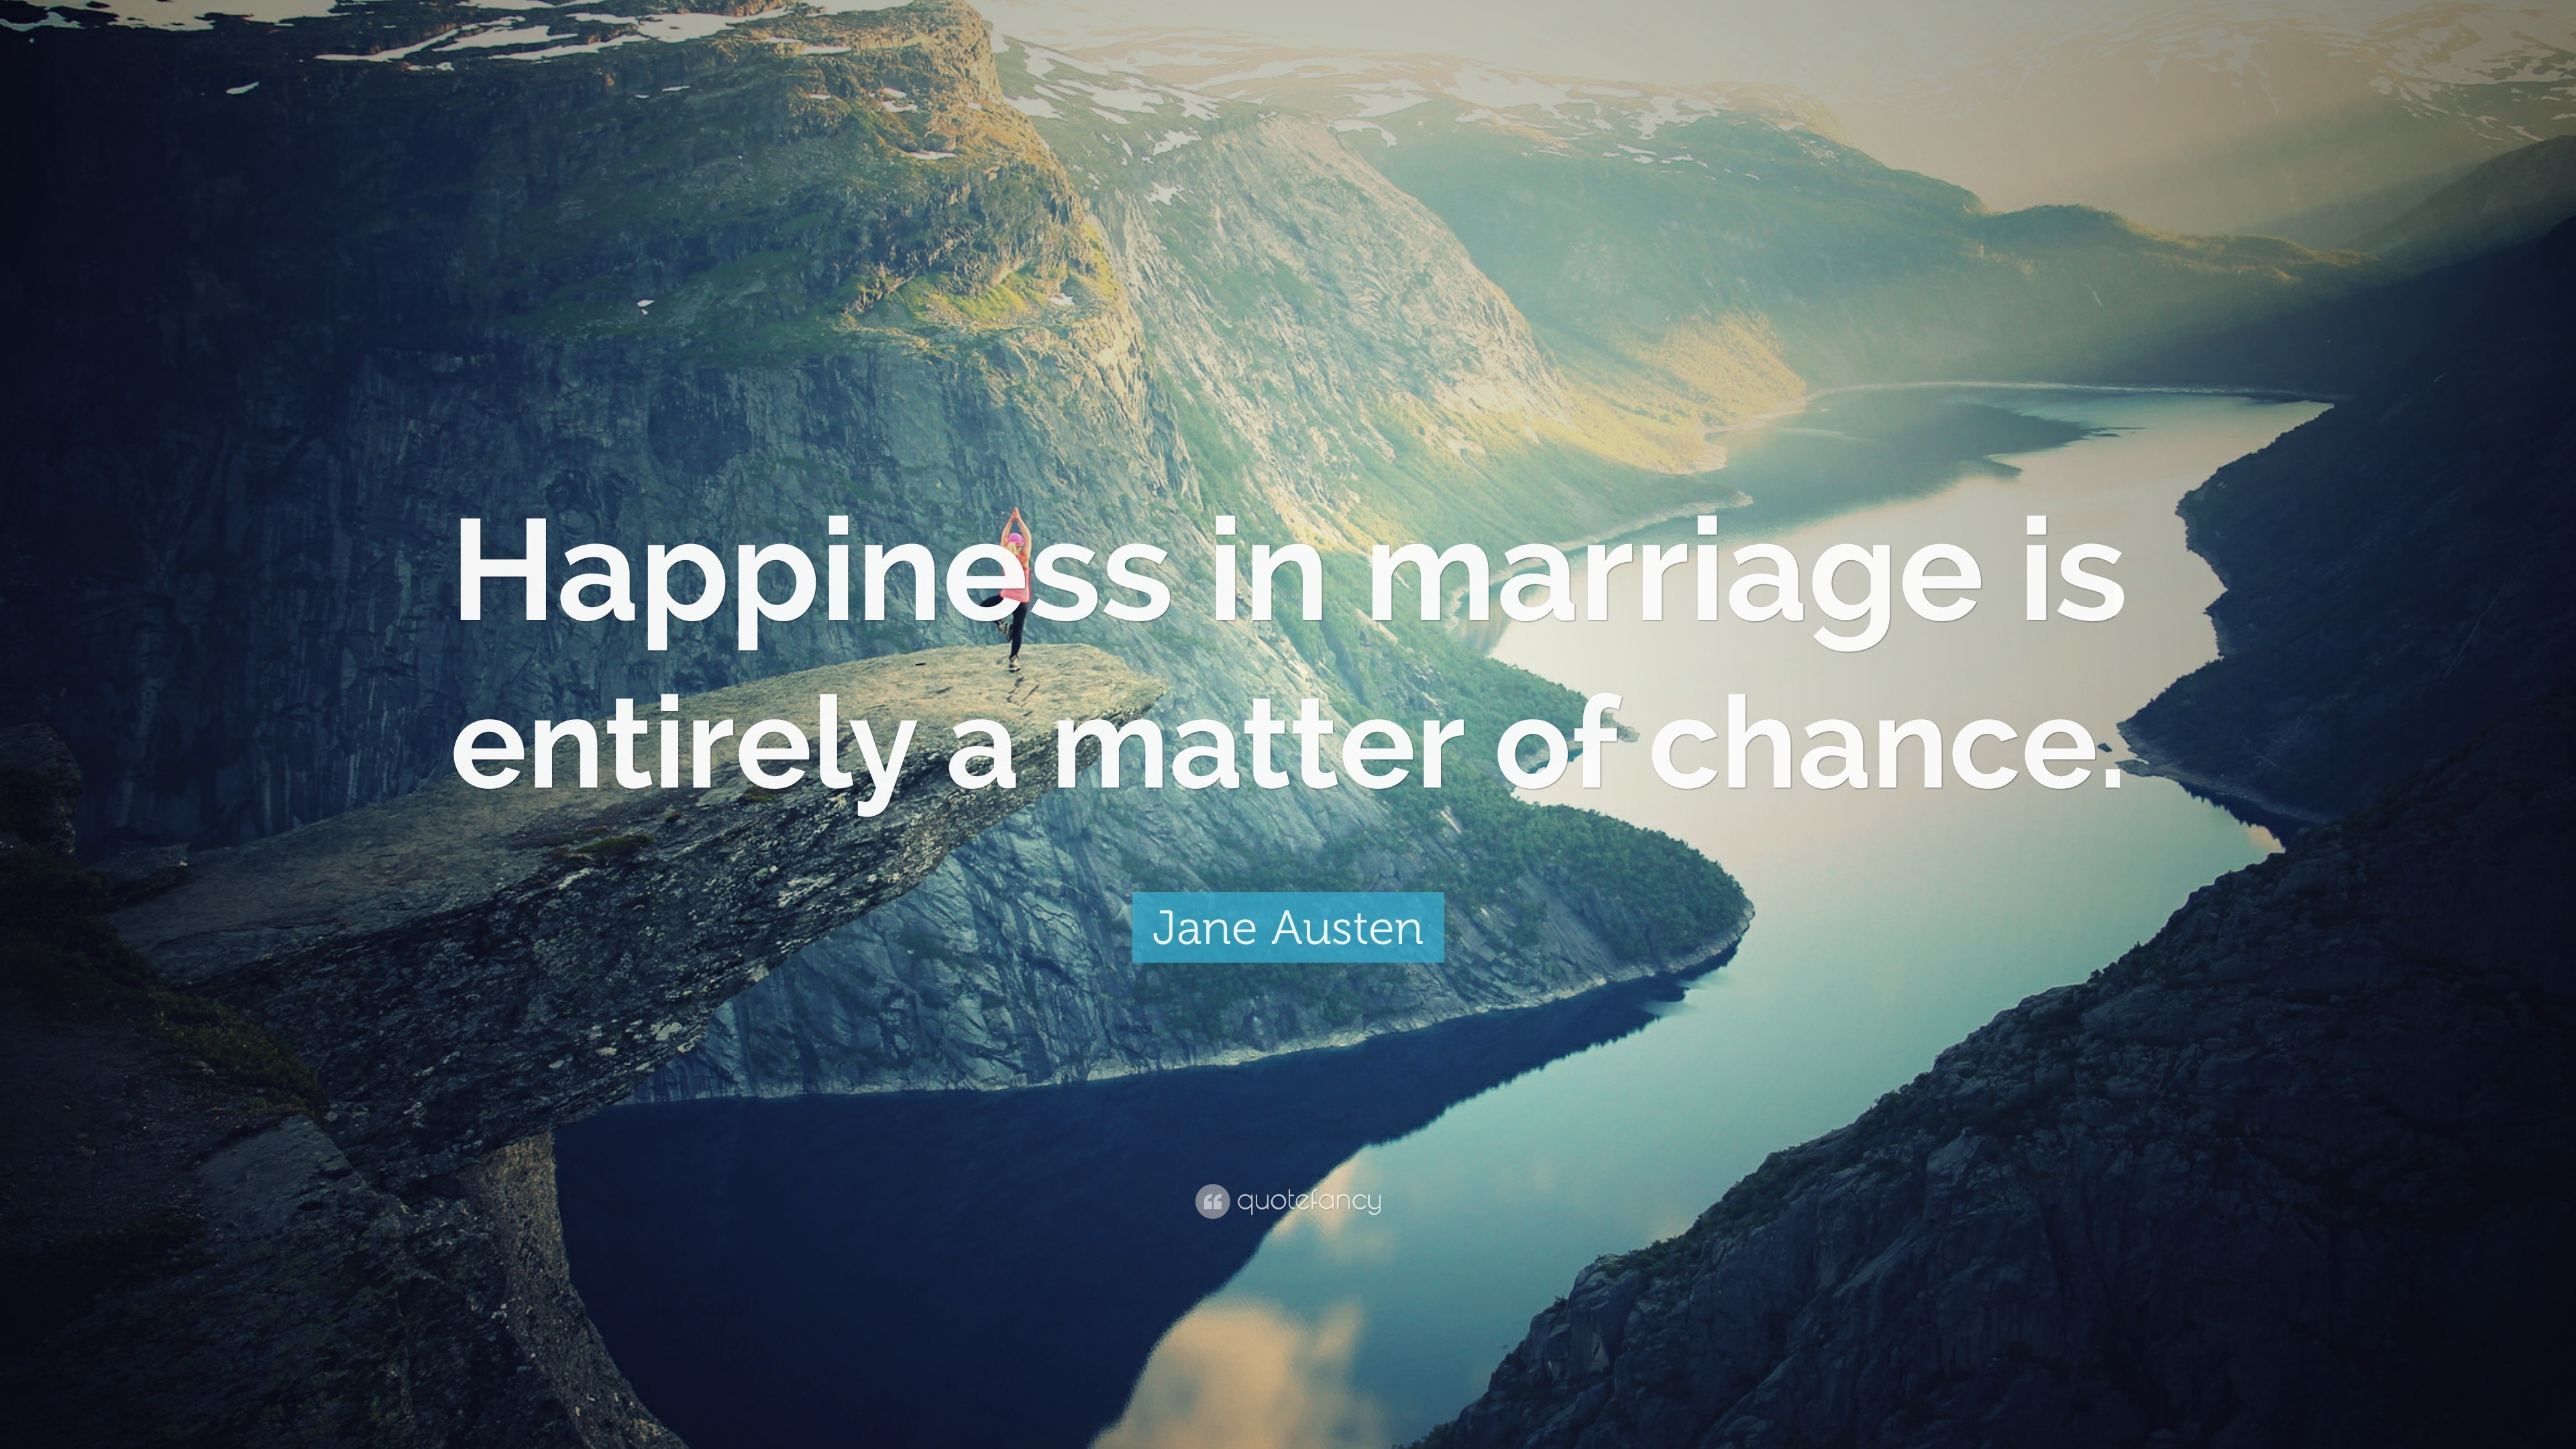 happiness in marriage is entirely a matter of chance